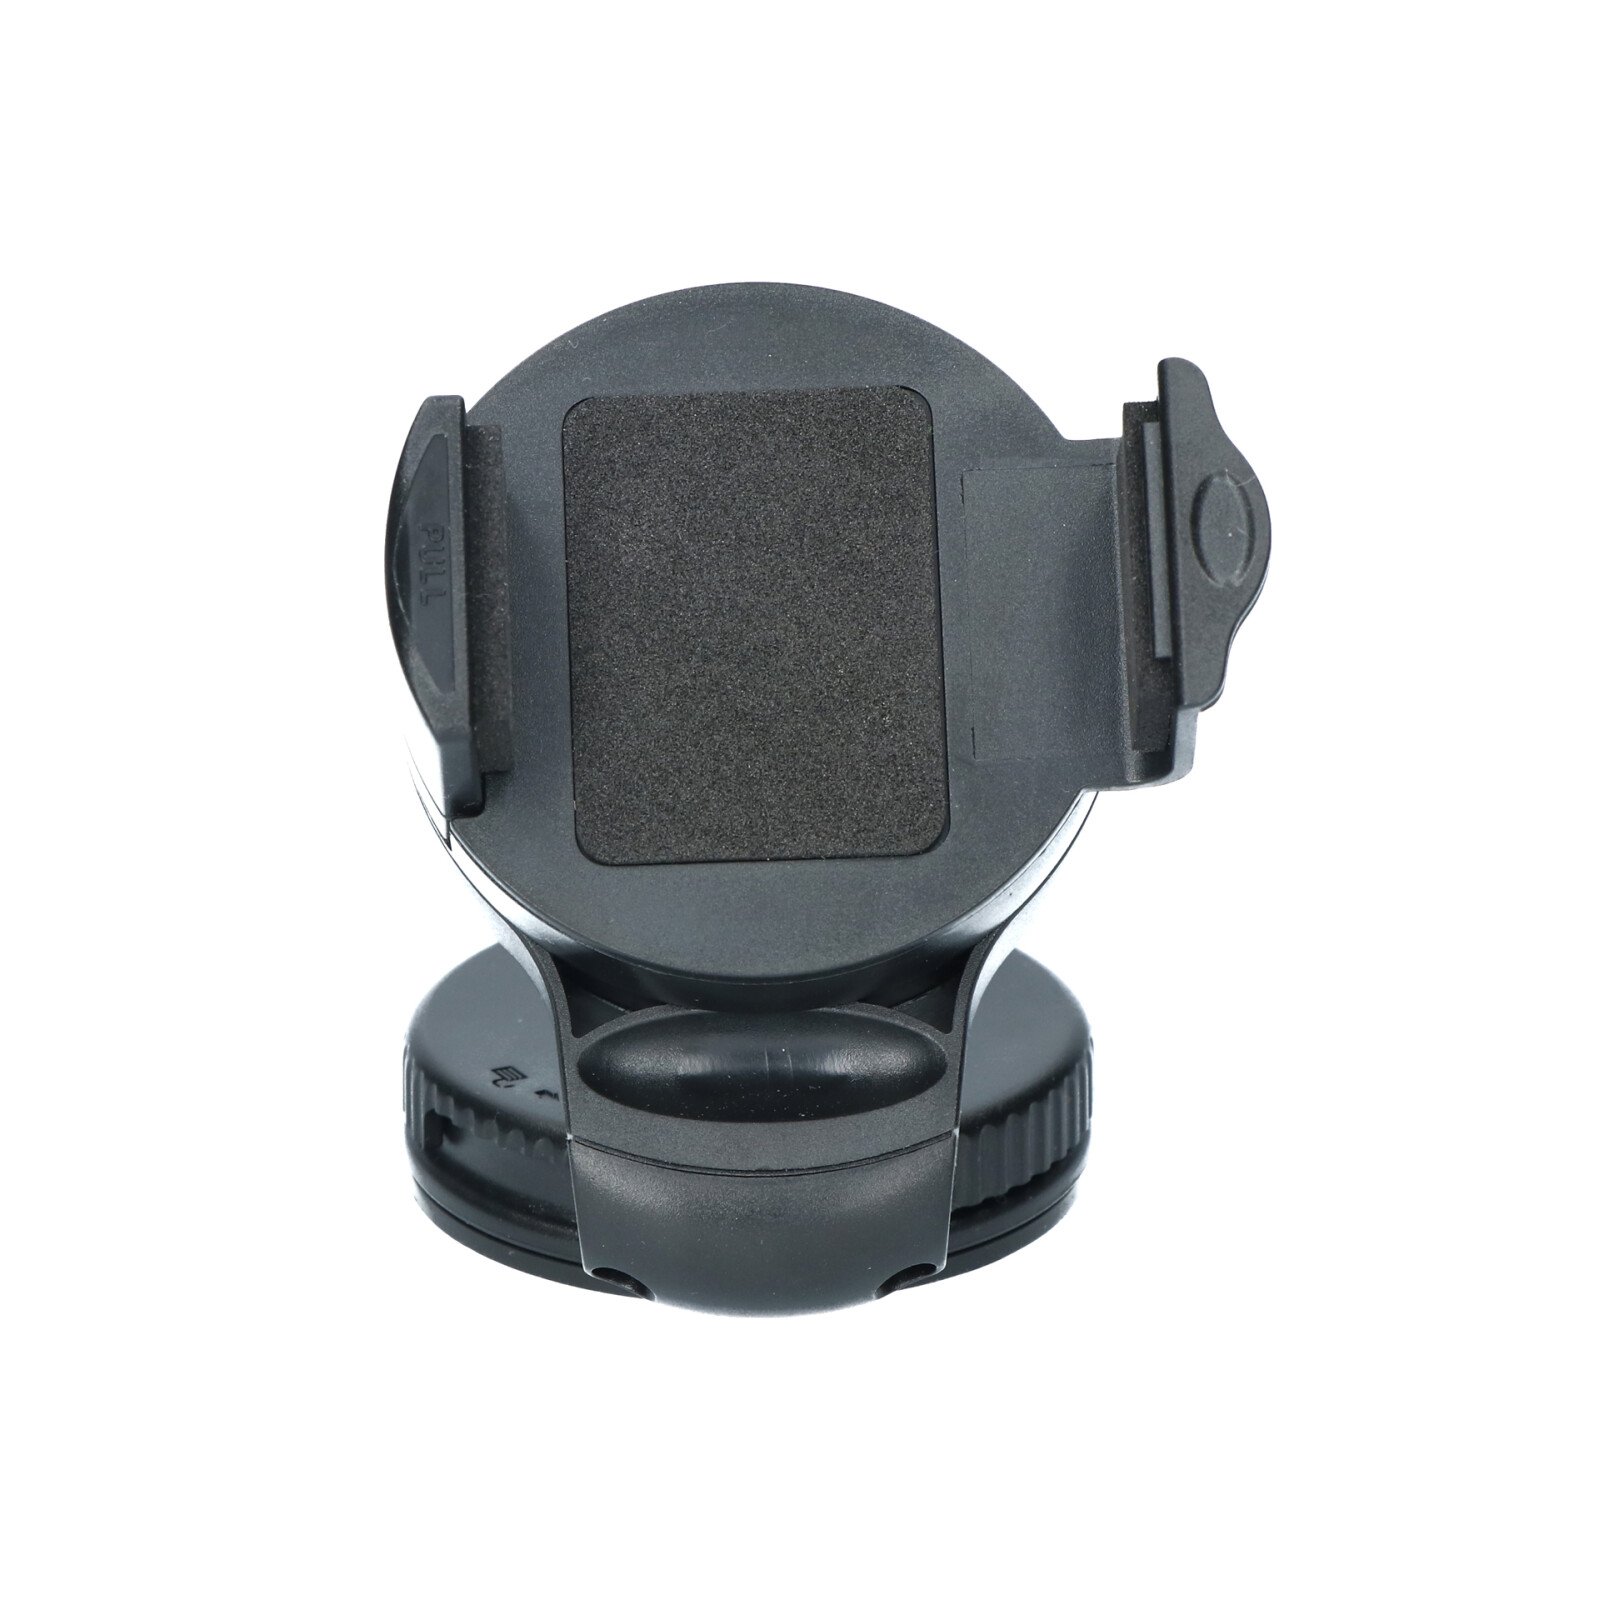 Mobile phone holder with suction cup, width 55-85mm, Carpoint - Black thumb